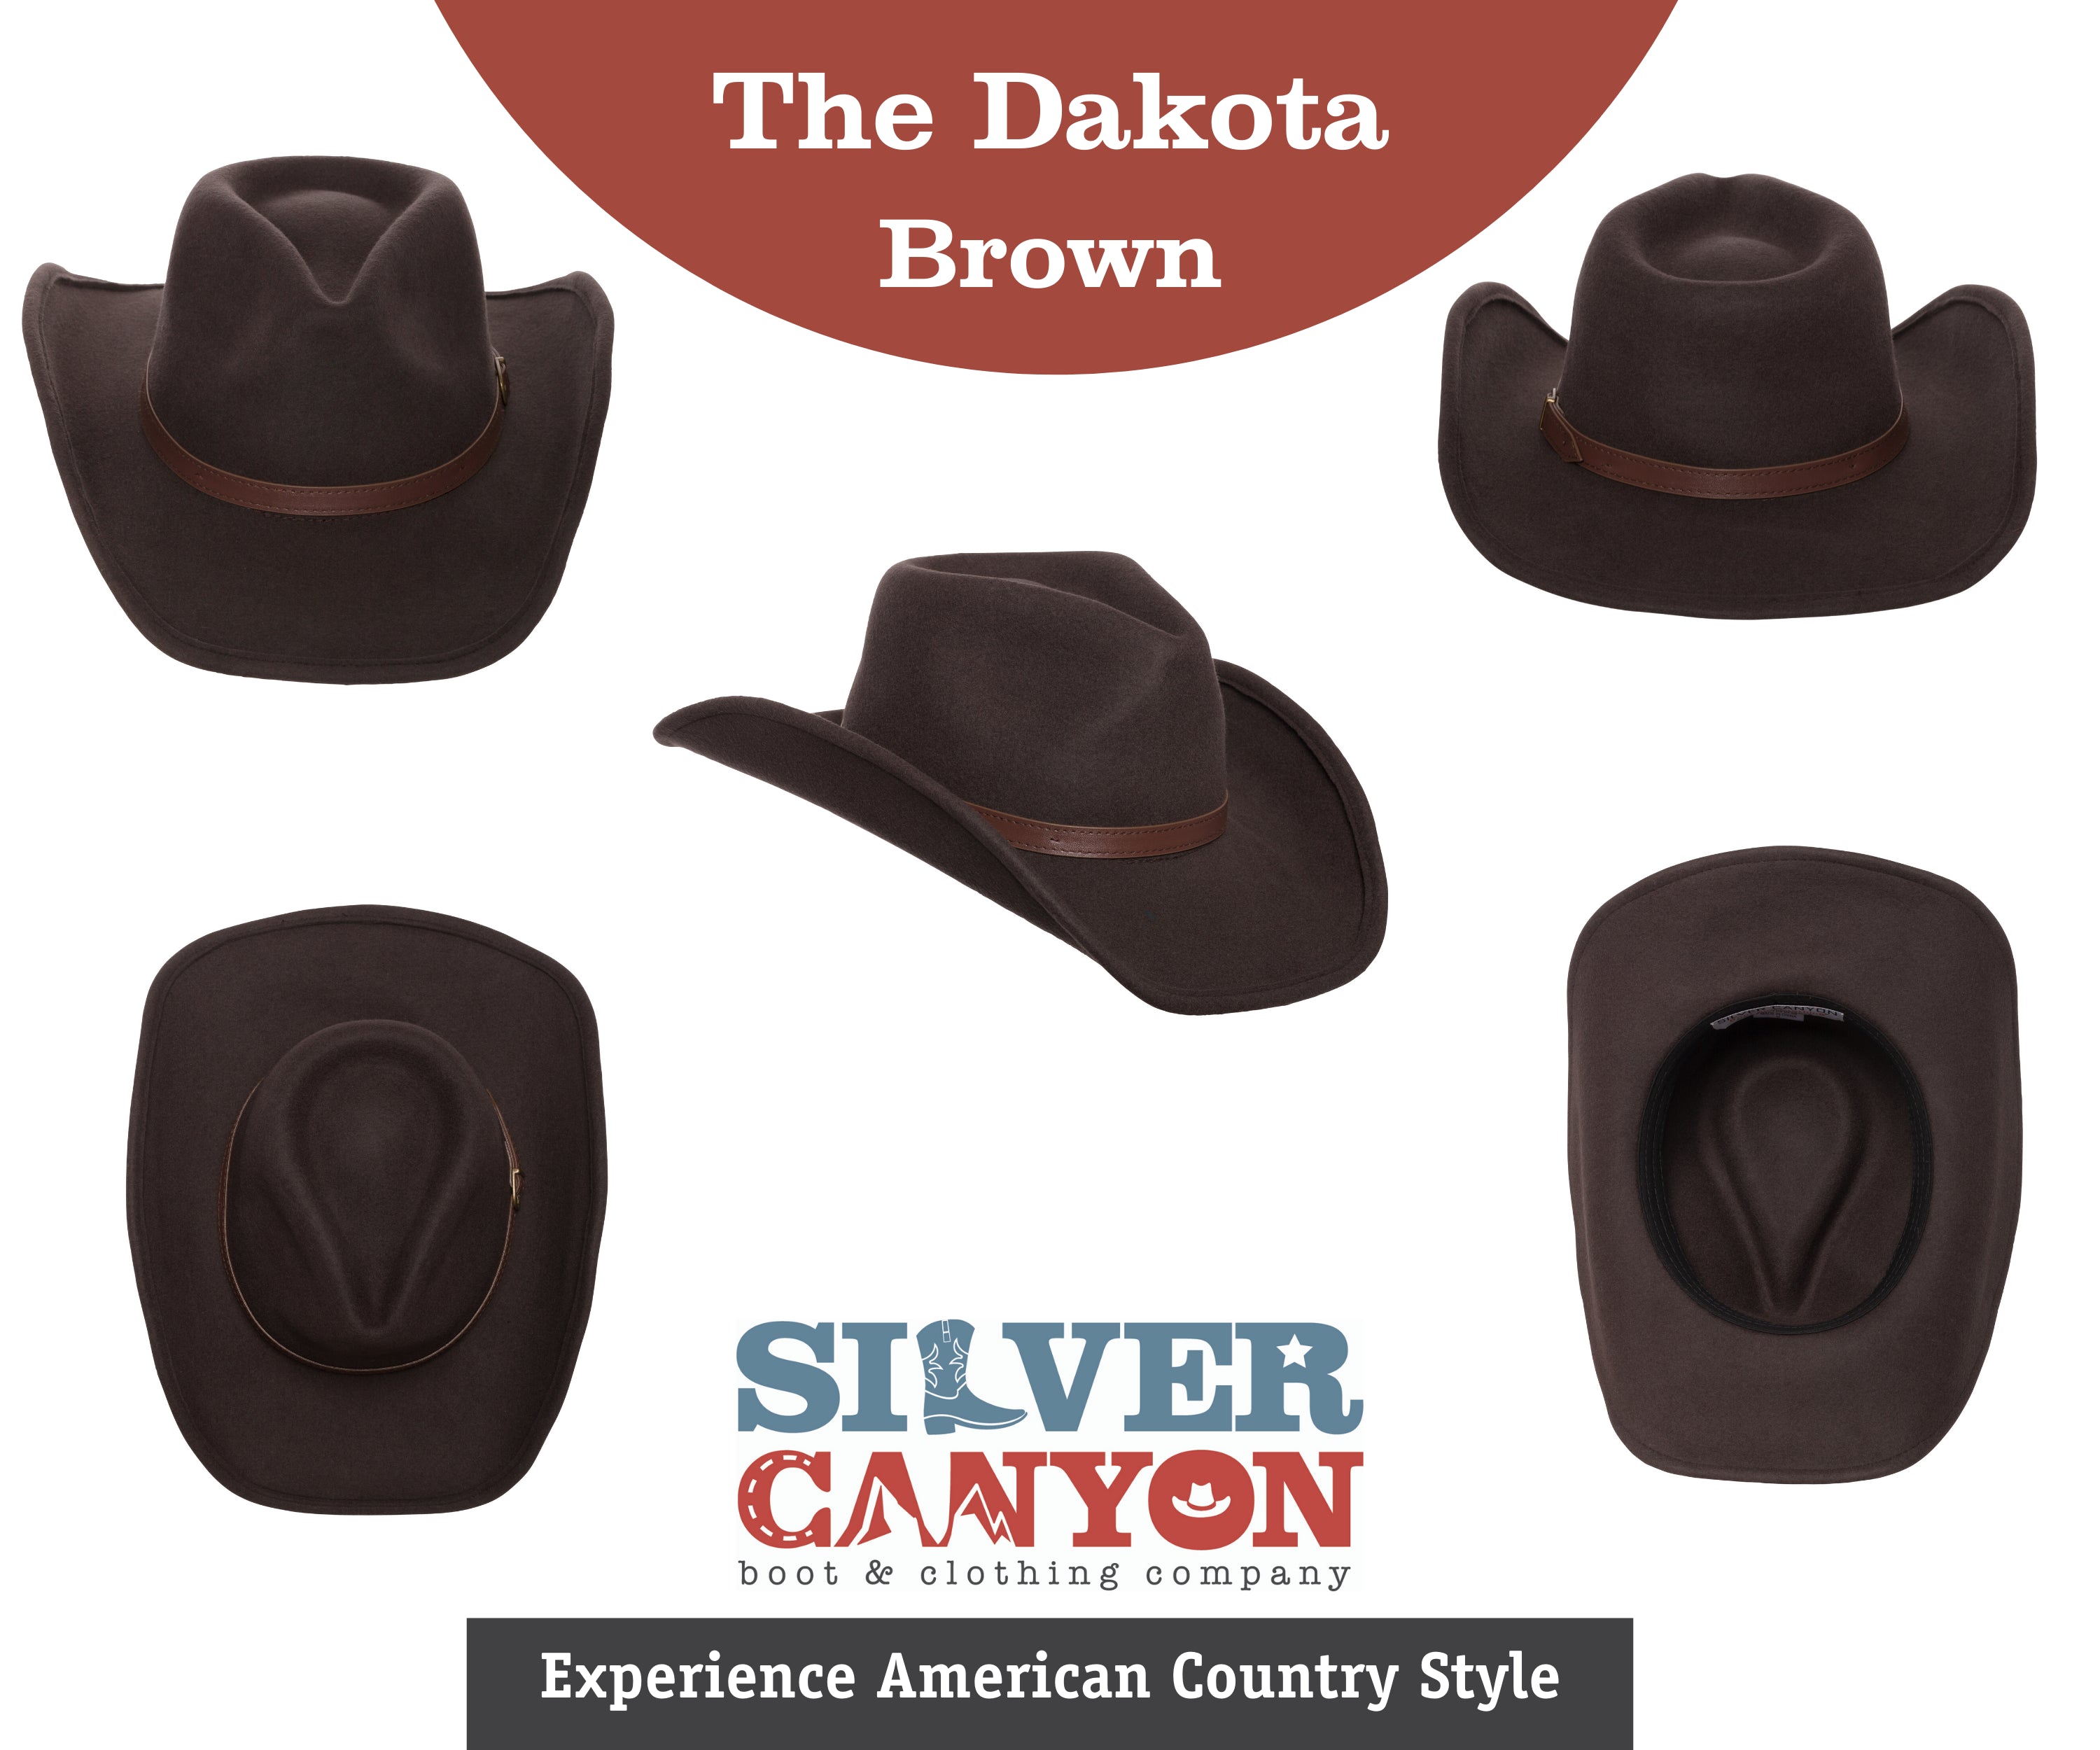 Men's Stetson Hats - Country Outfitter